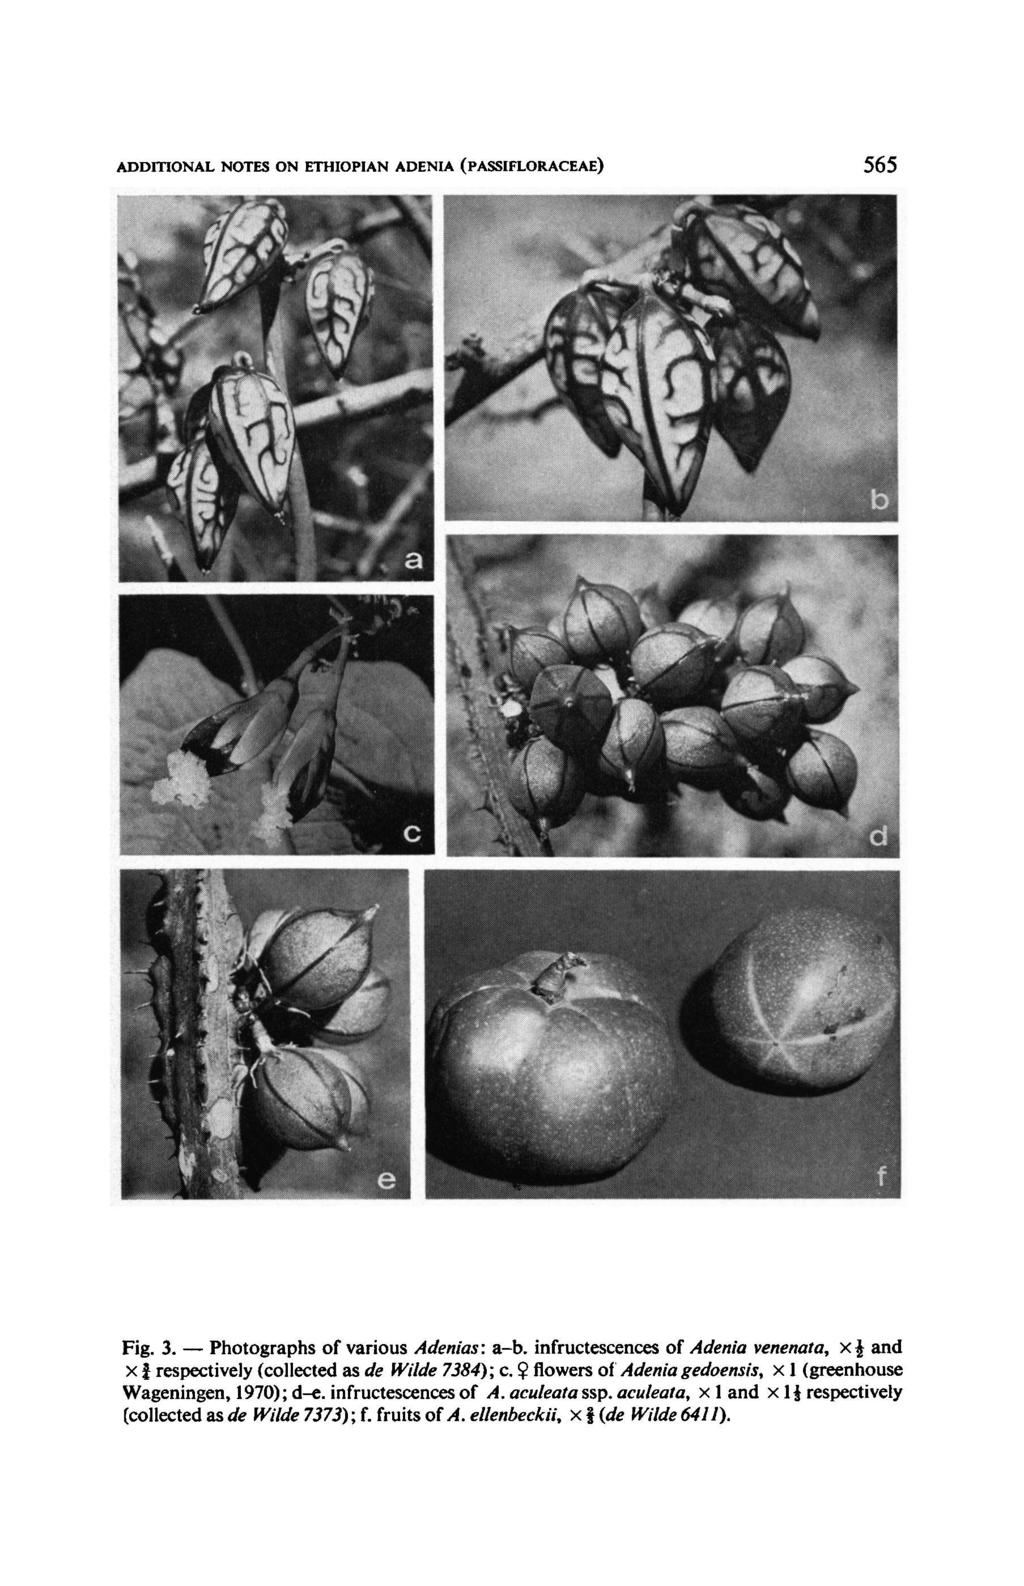 Photographs ADDITIONAL NOTES ON ETHIOPIAN ADENIA (PASSIFLORACEAE) 565 Fig. 3. of various Adenias: a-b. infructescences of Ade nia venenata. x J and x î respectively (collected as de Wilde 7384); c.